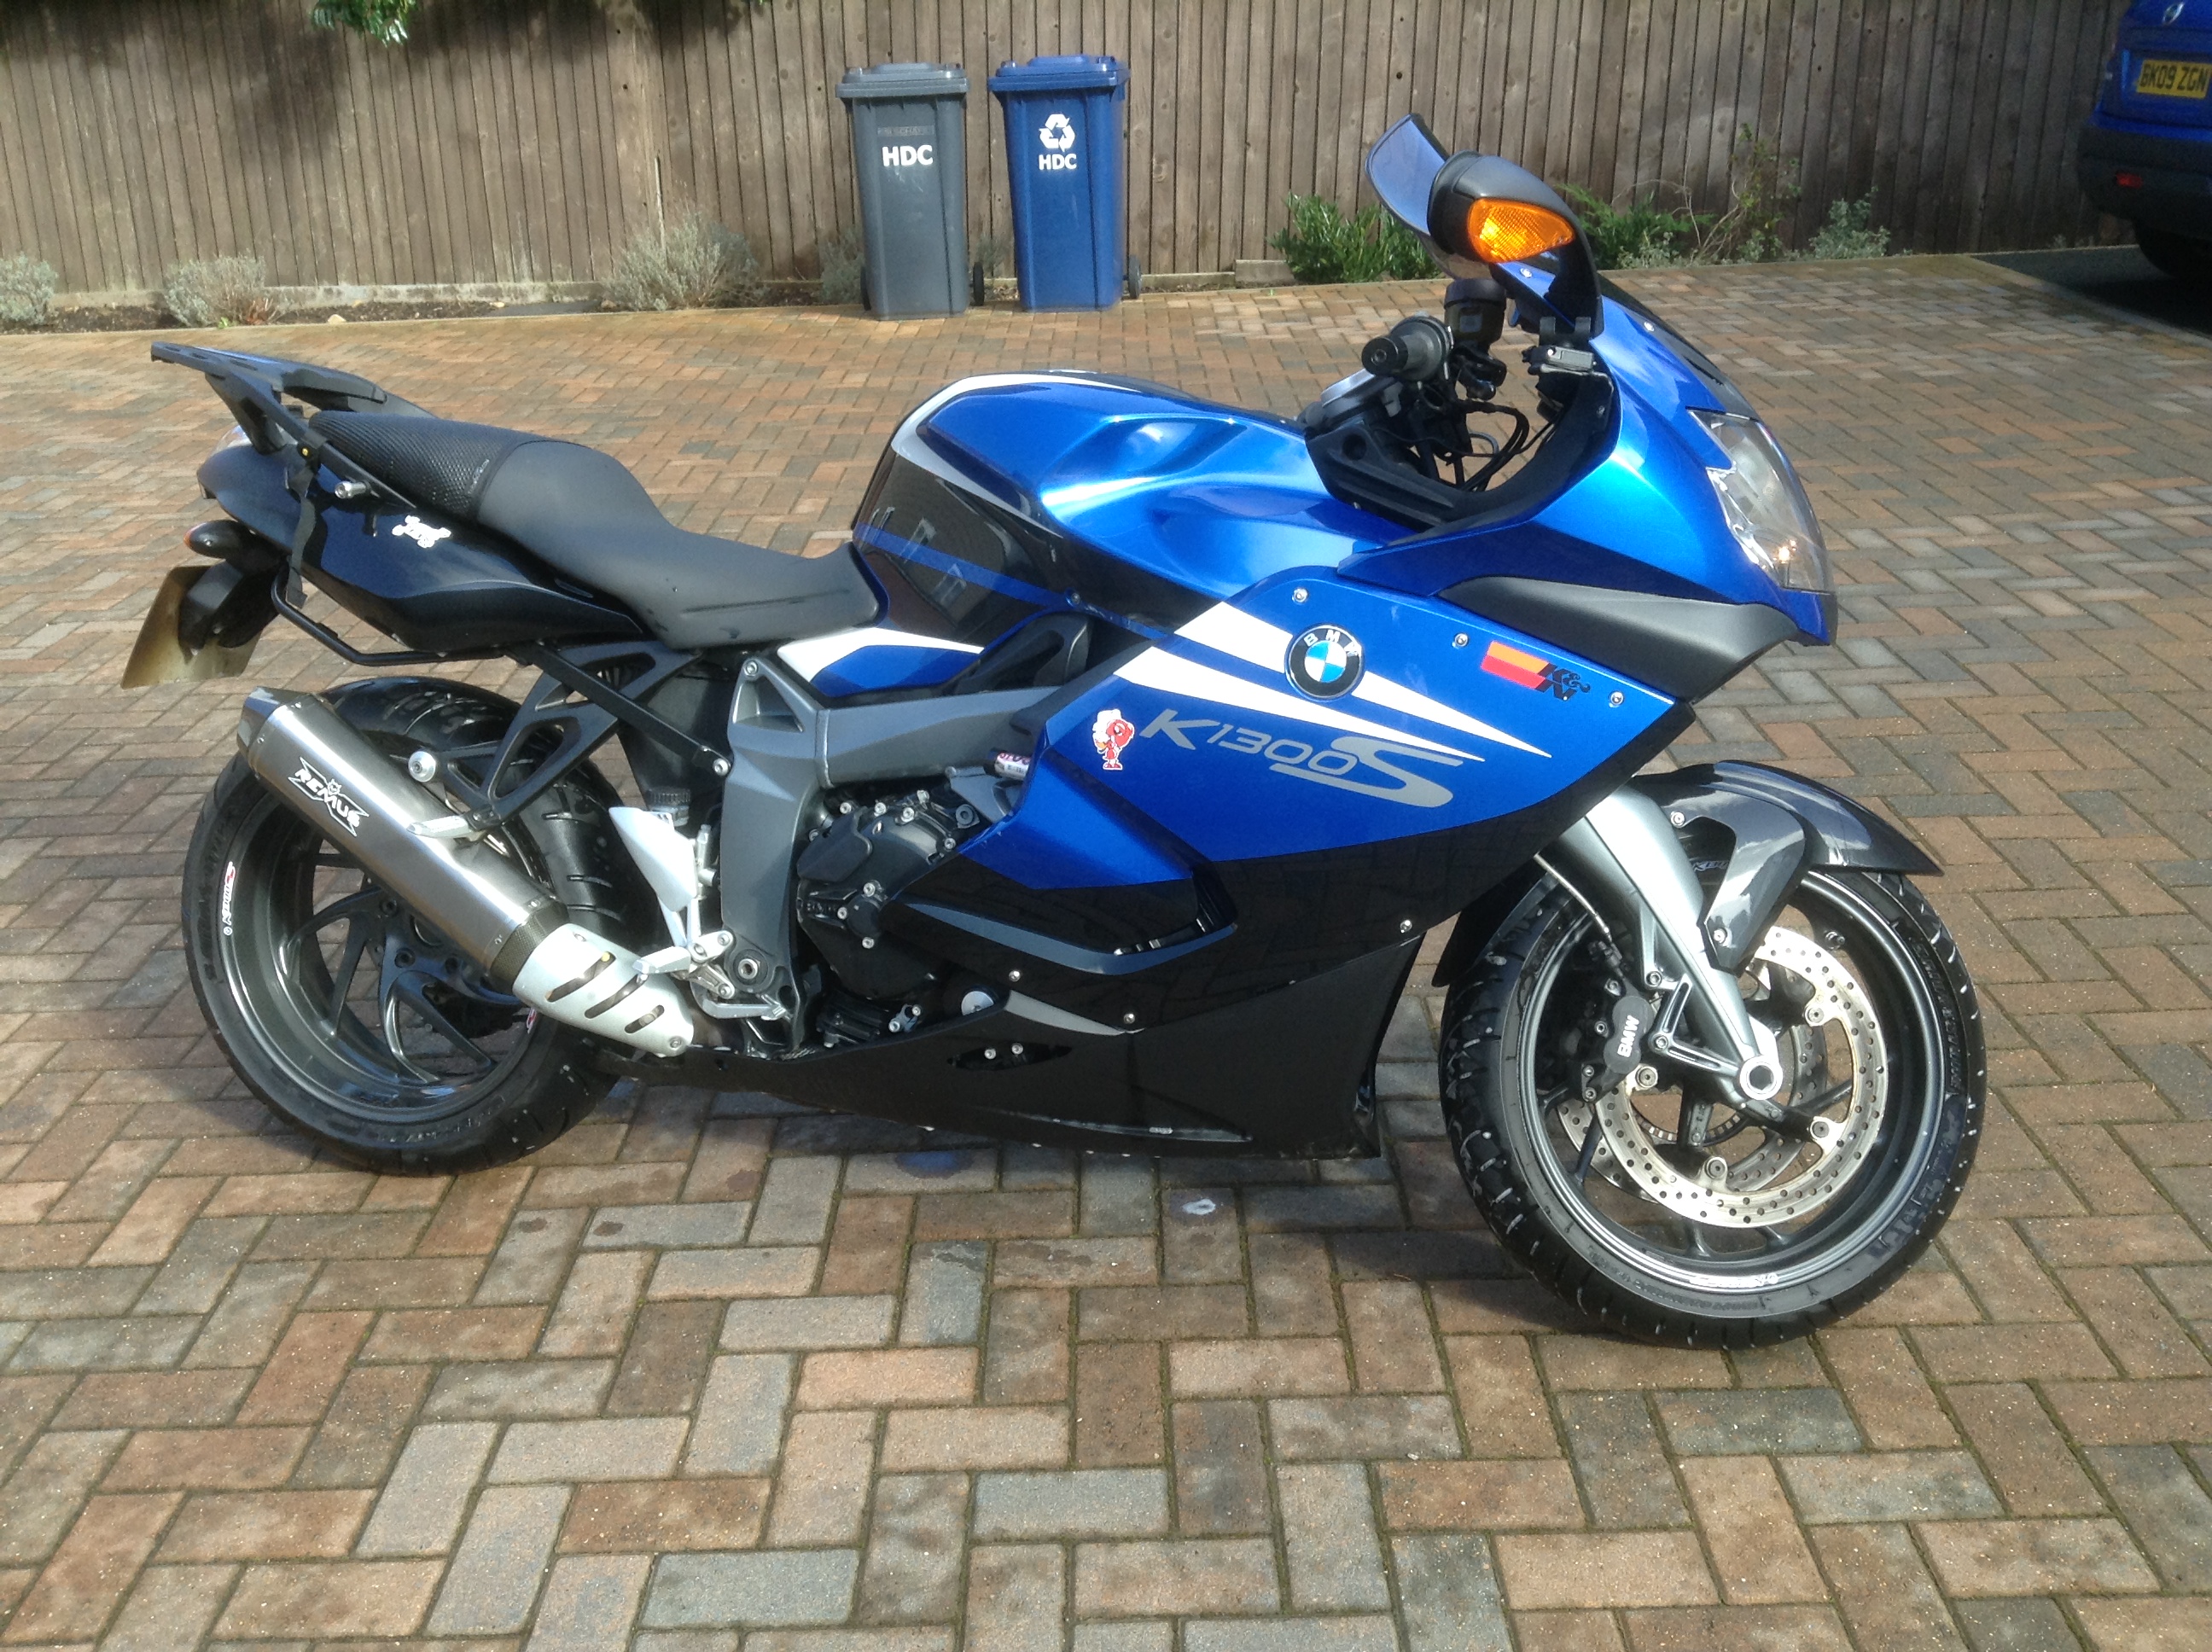 BMW K1300S ECU remap – an owner emails his thoughts…